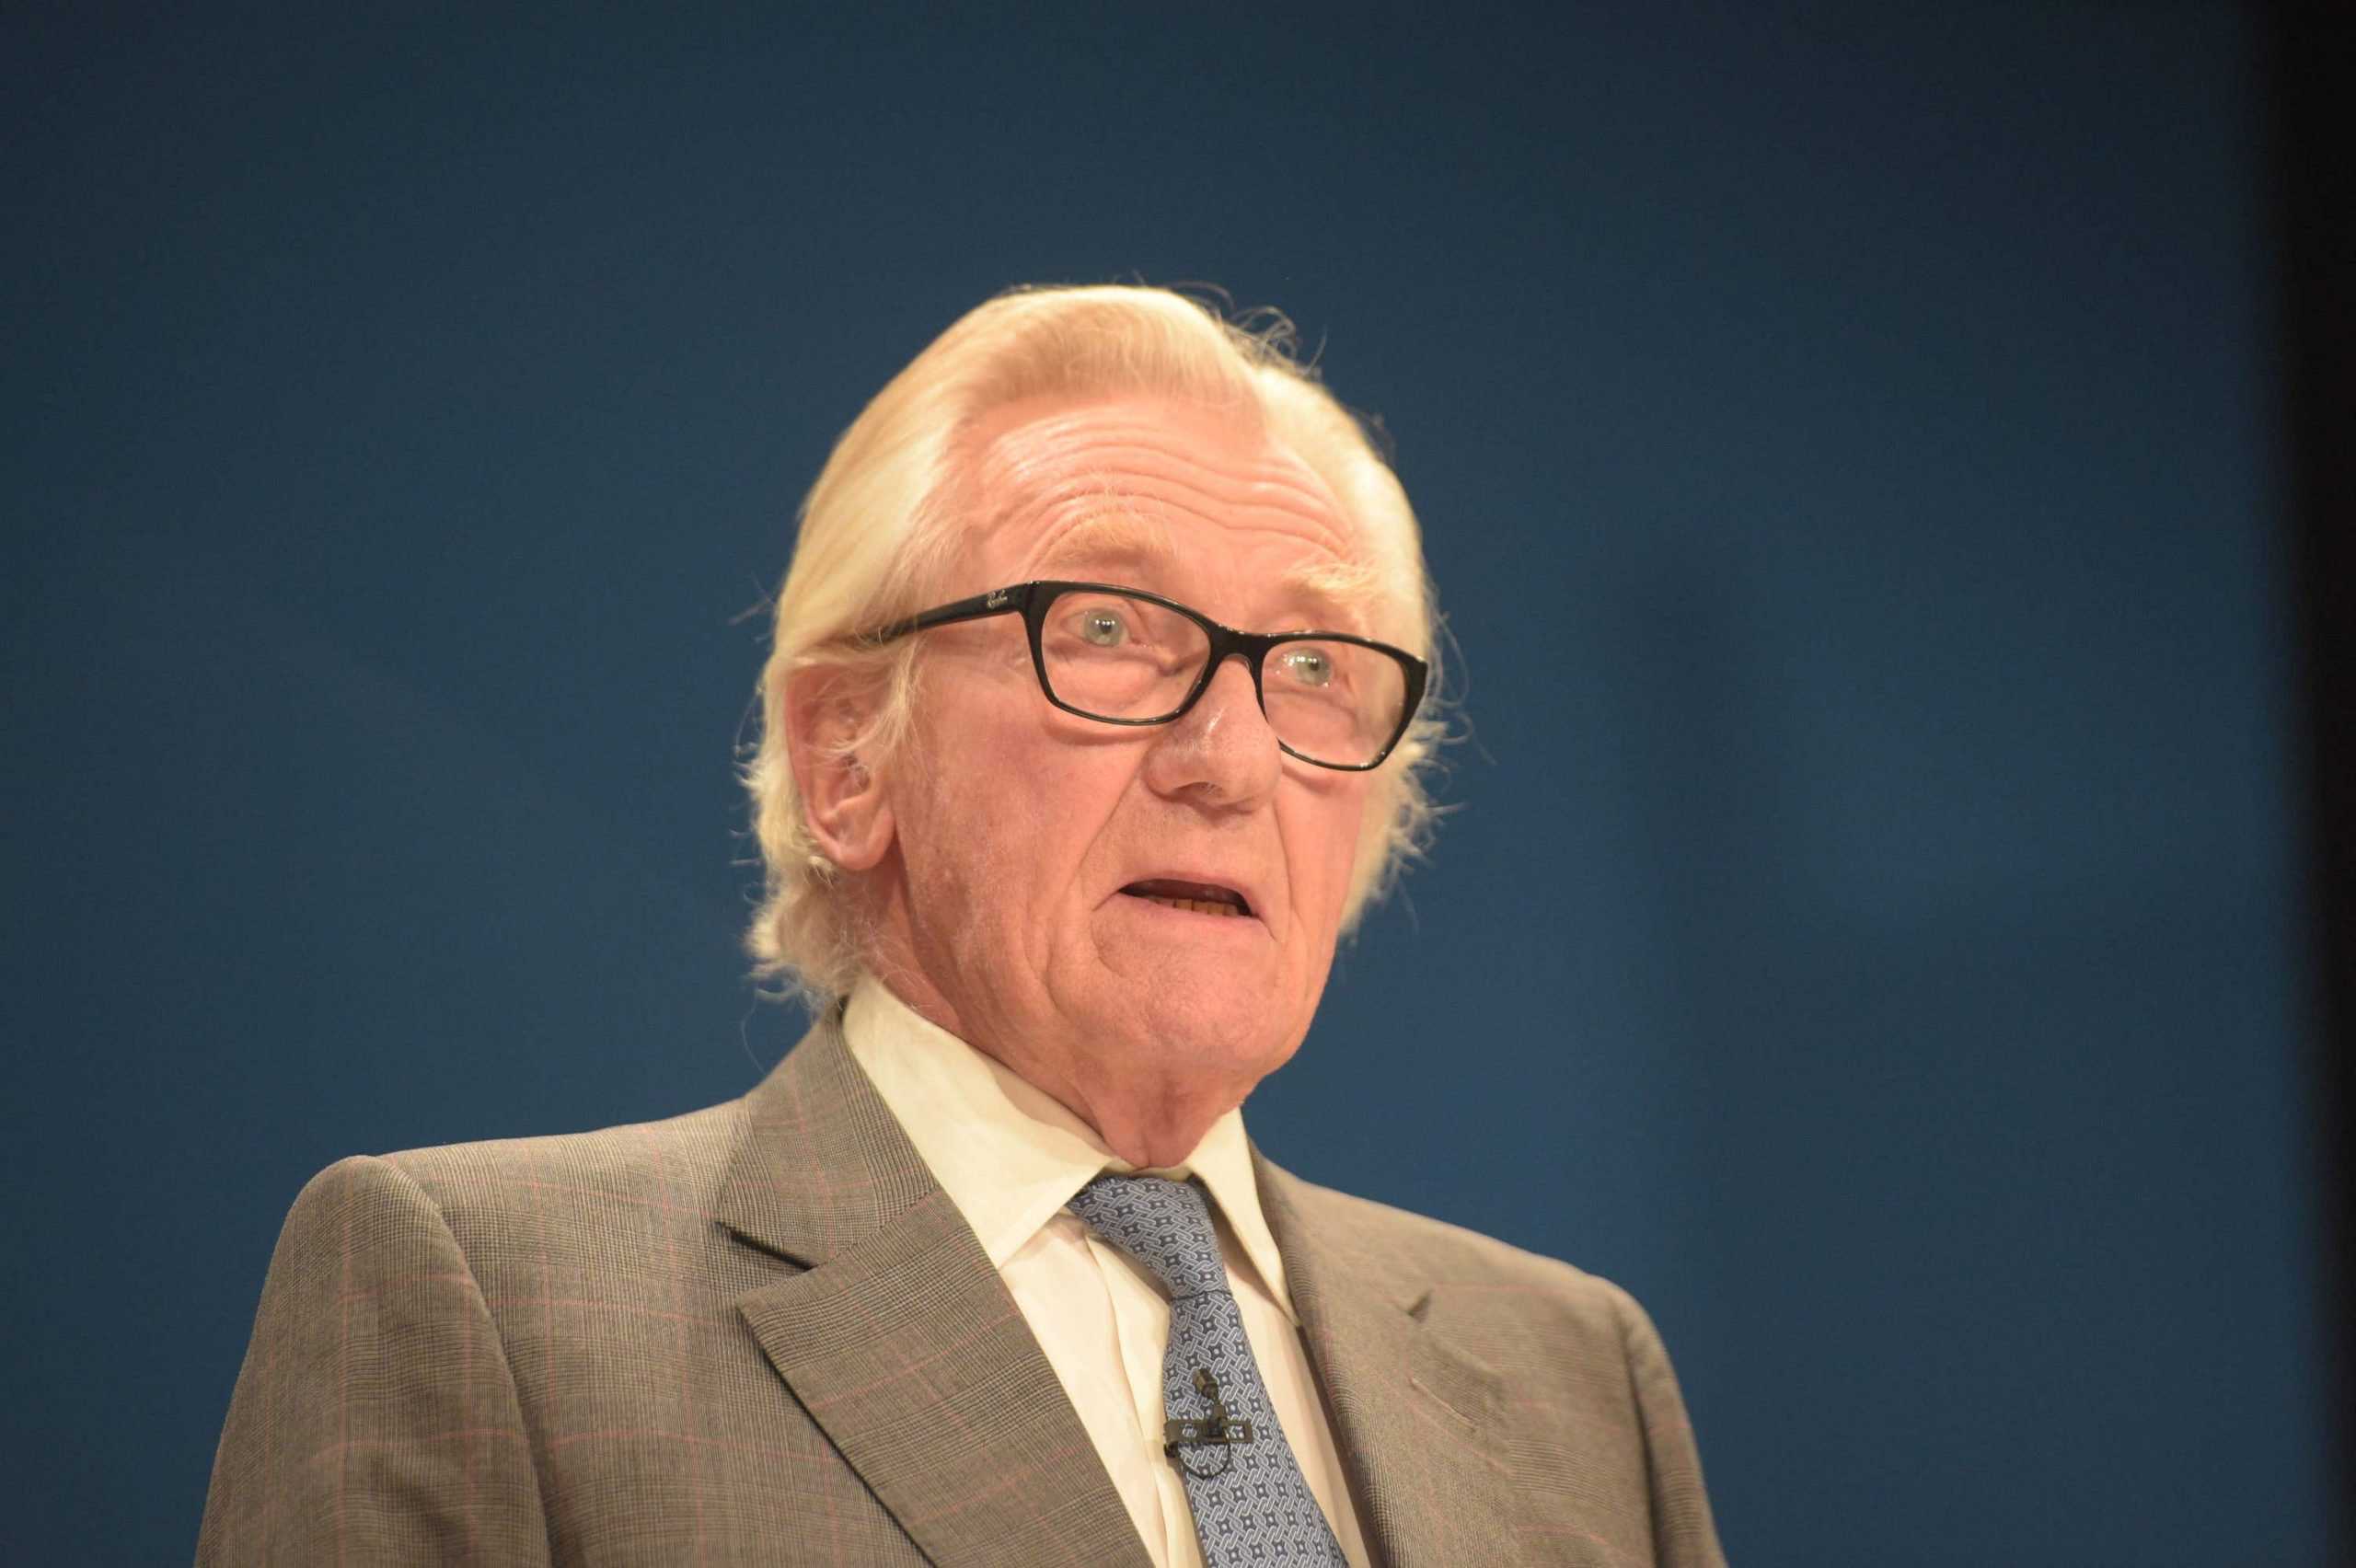 ‘Silence on Brexit harms makes this is a dishonest election’ – Michael Heseltine